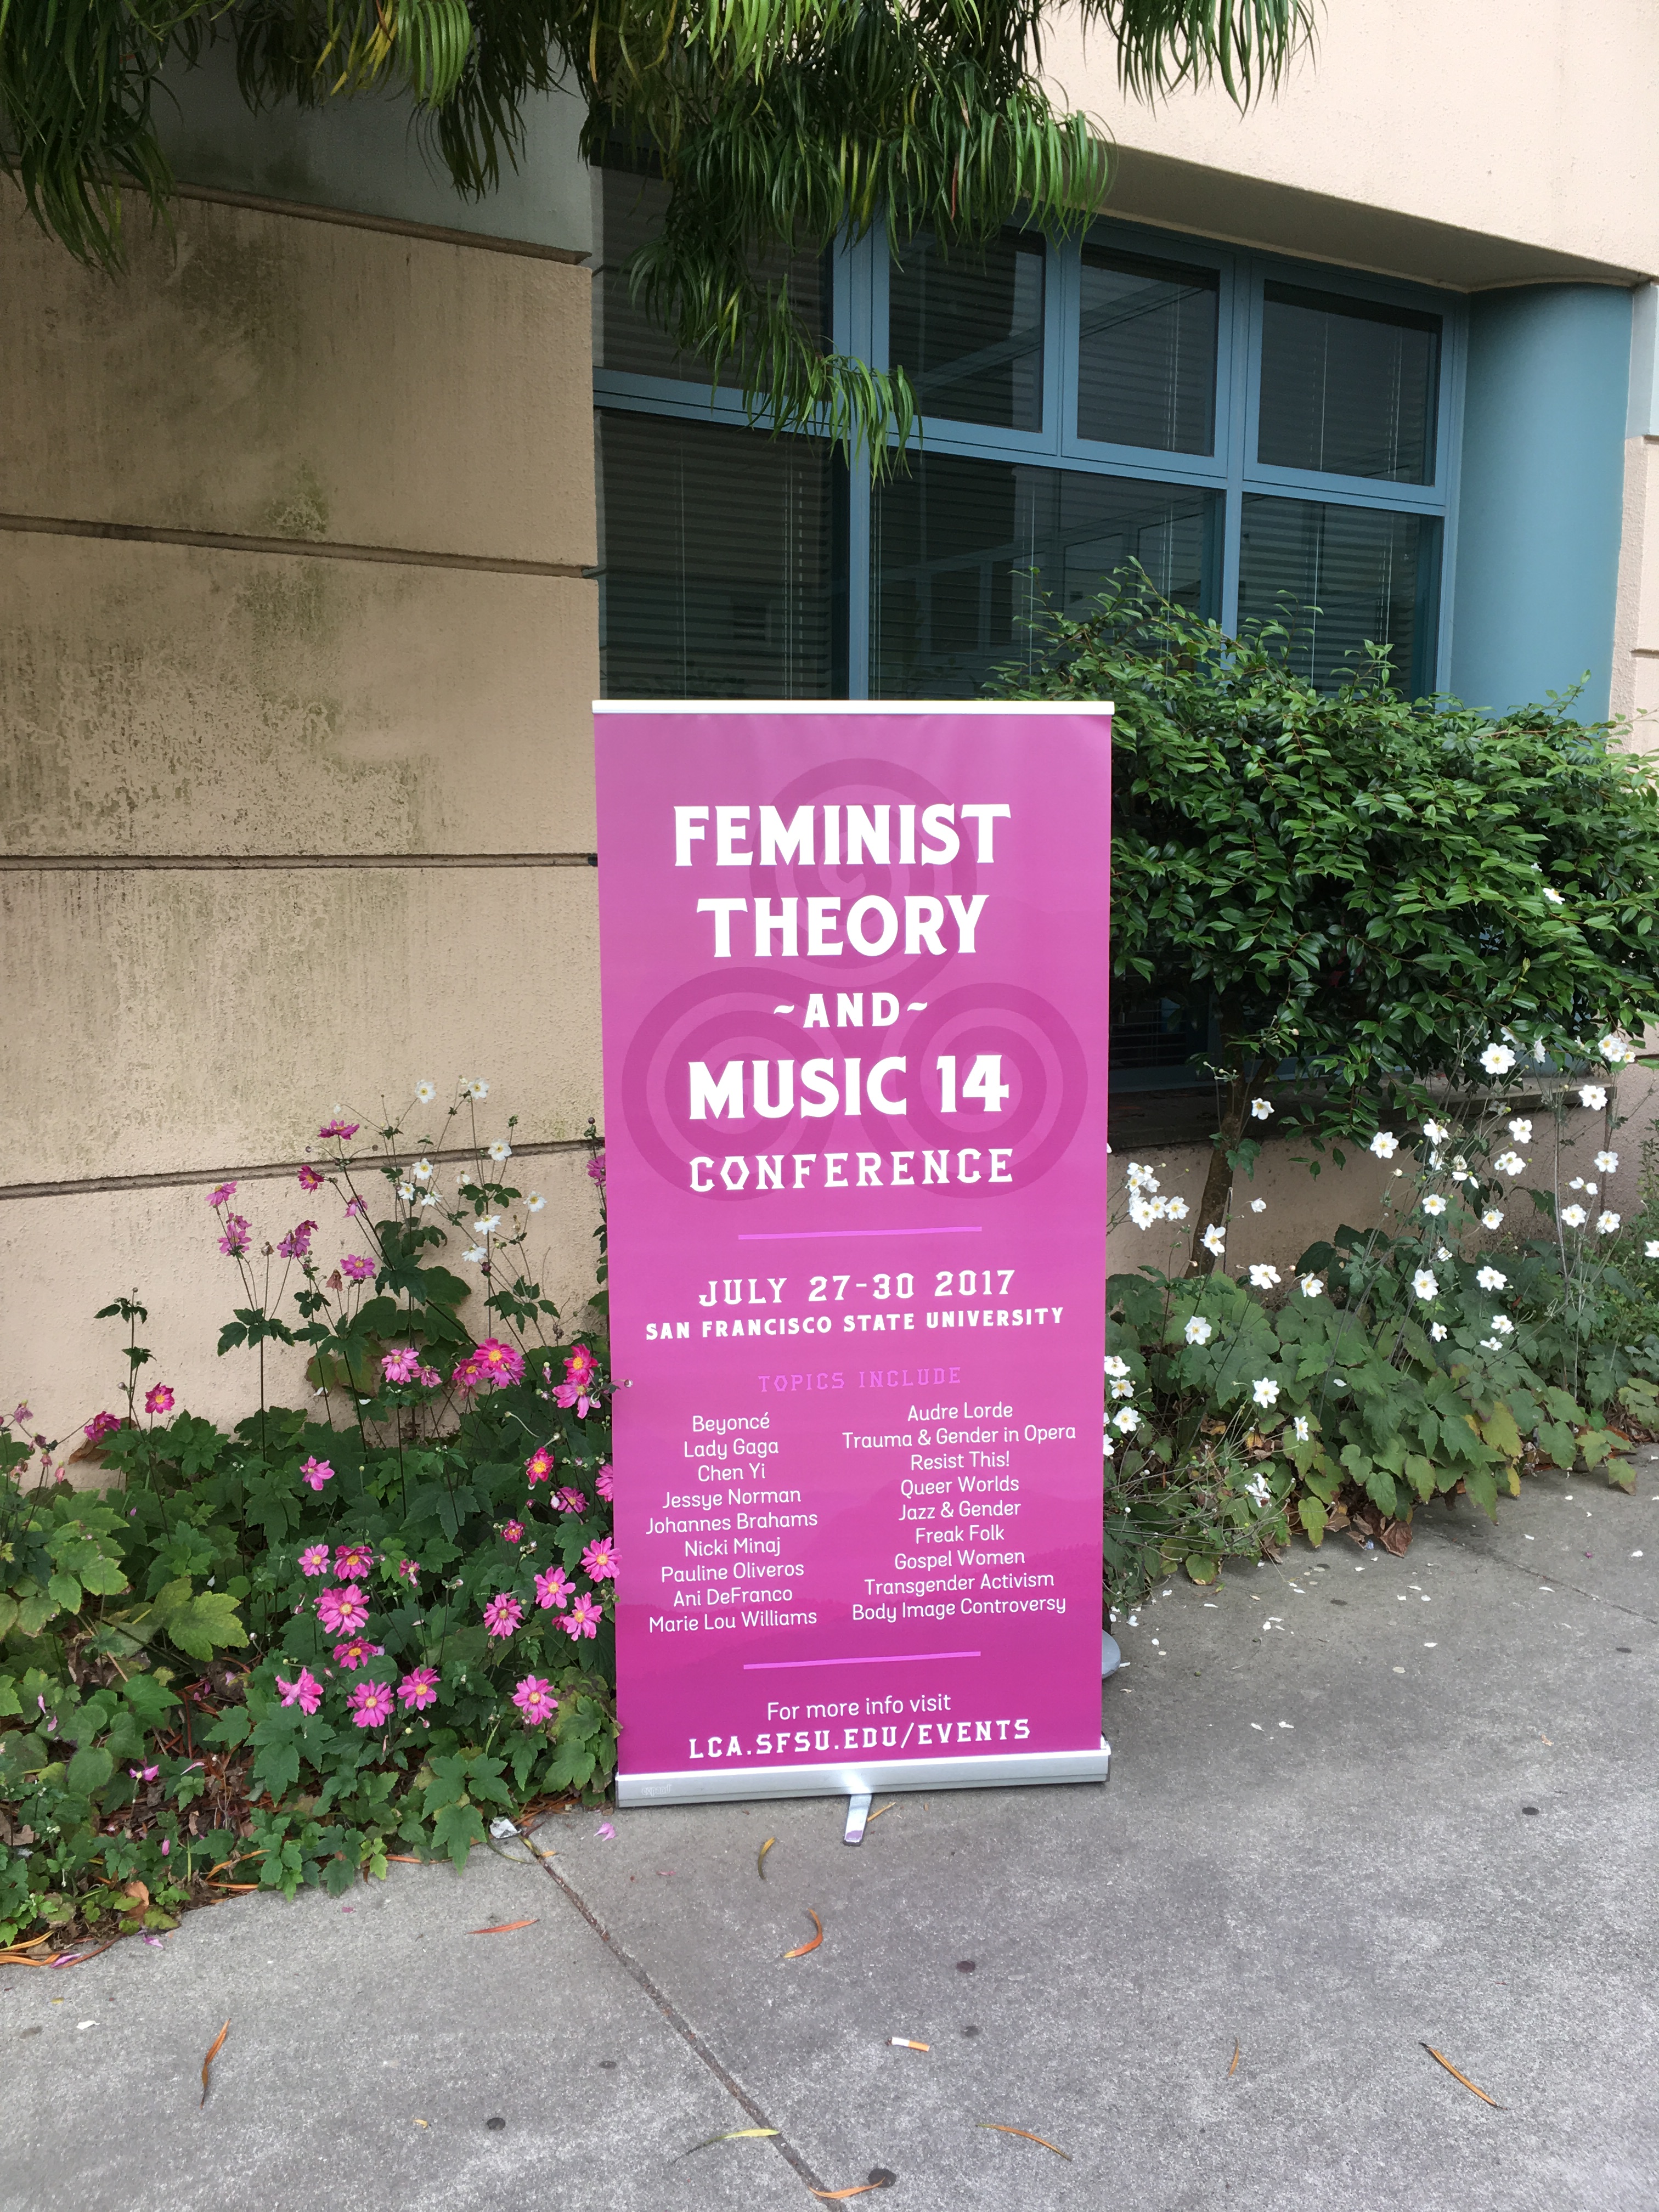 Feminist Theory and Music Conference in San Francisco